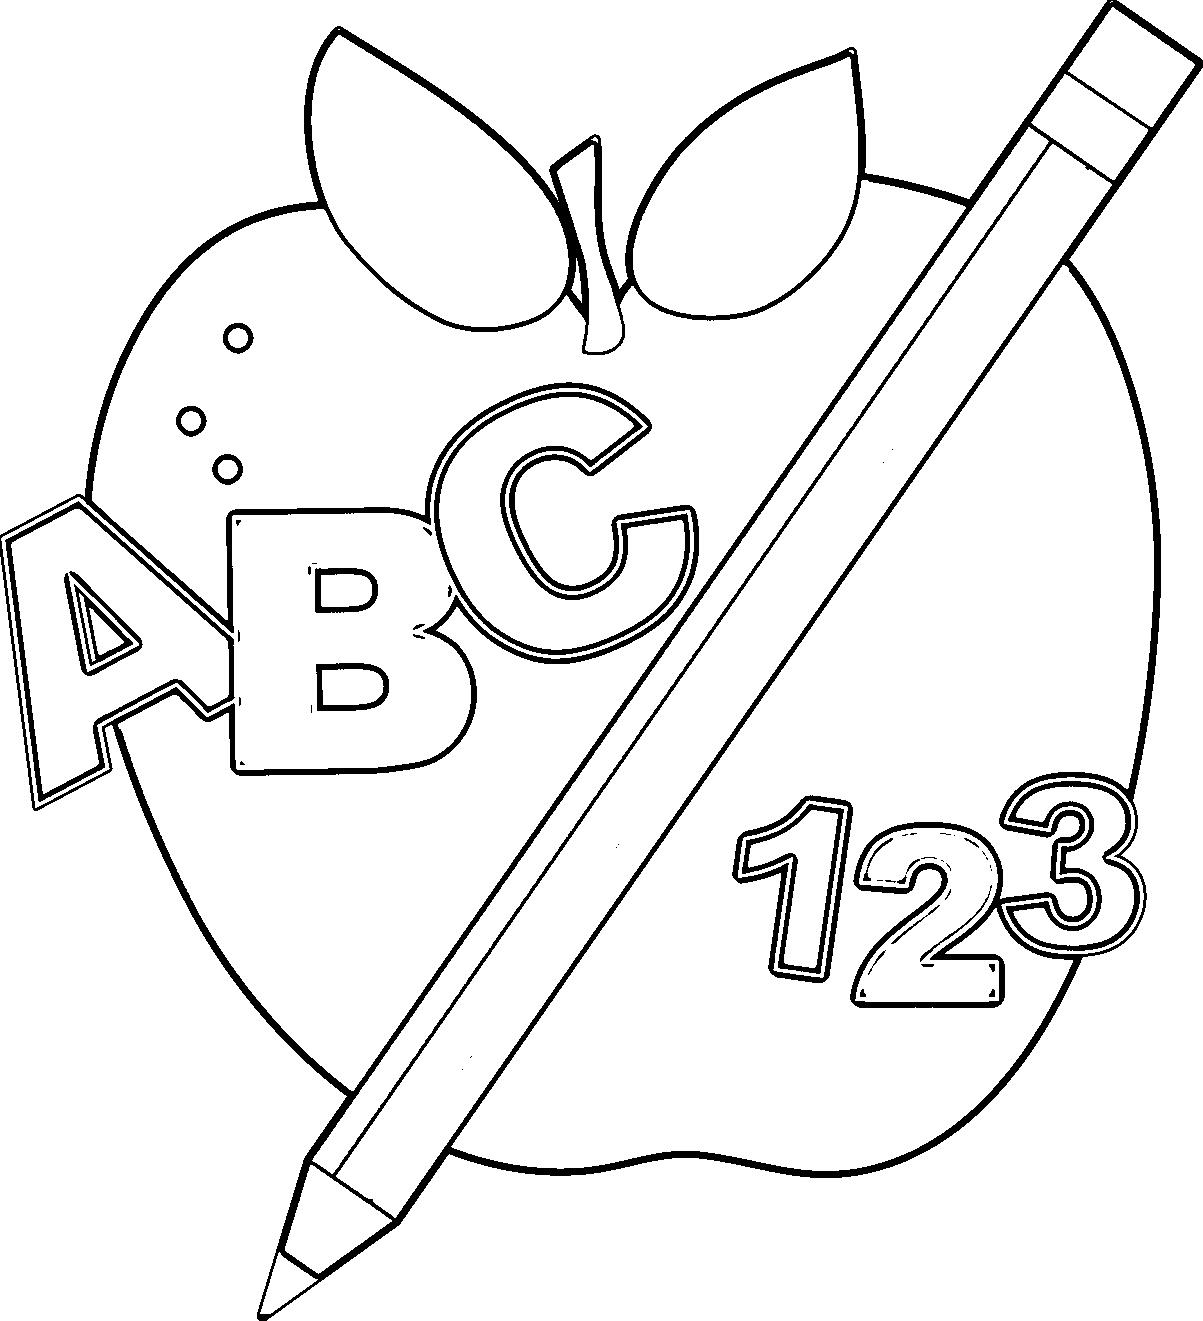 849 Cute Baby Rattle Coloring Page for Kindergarten